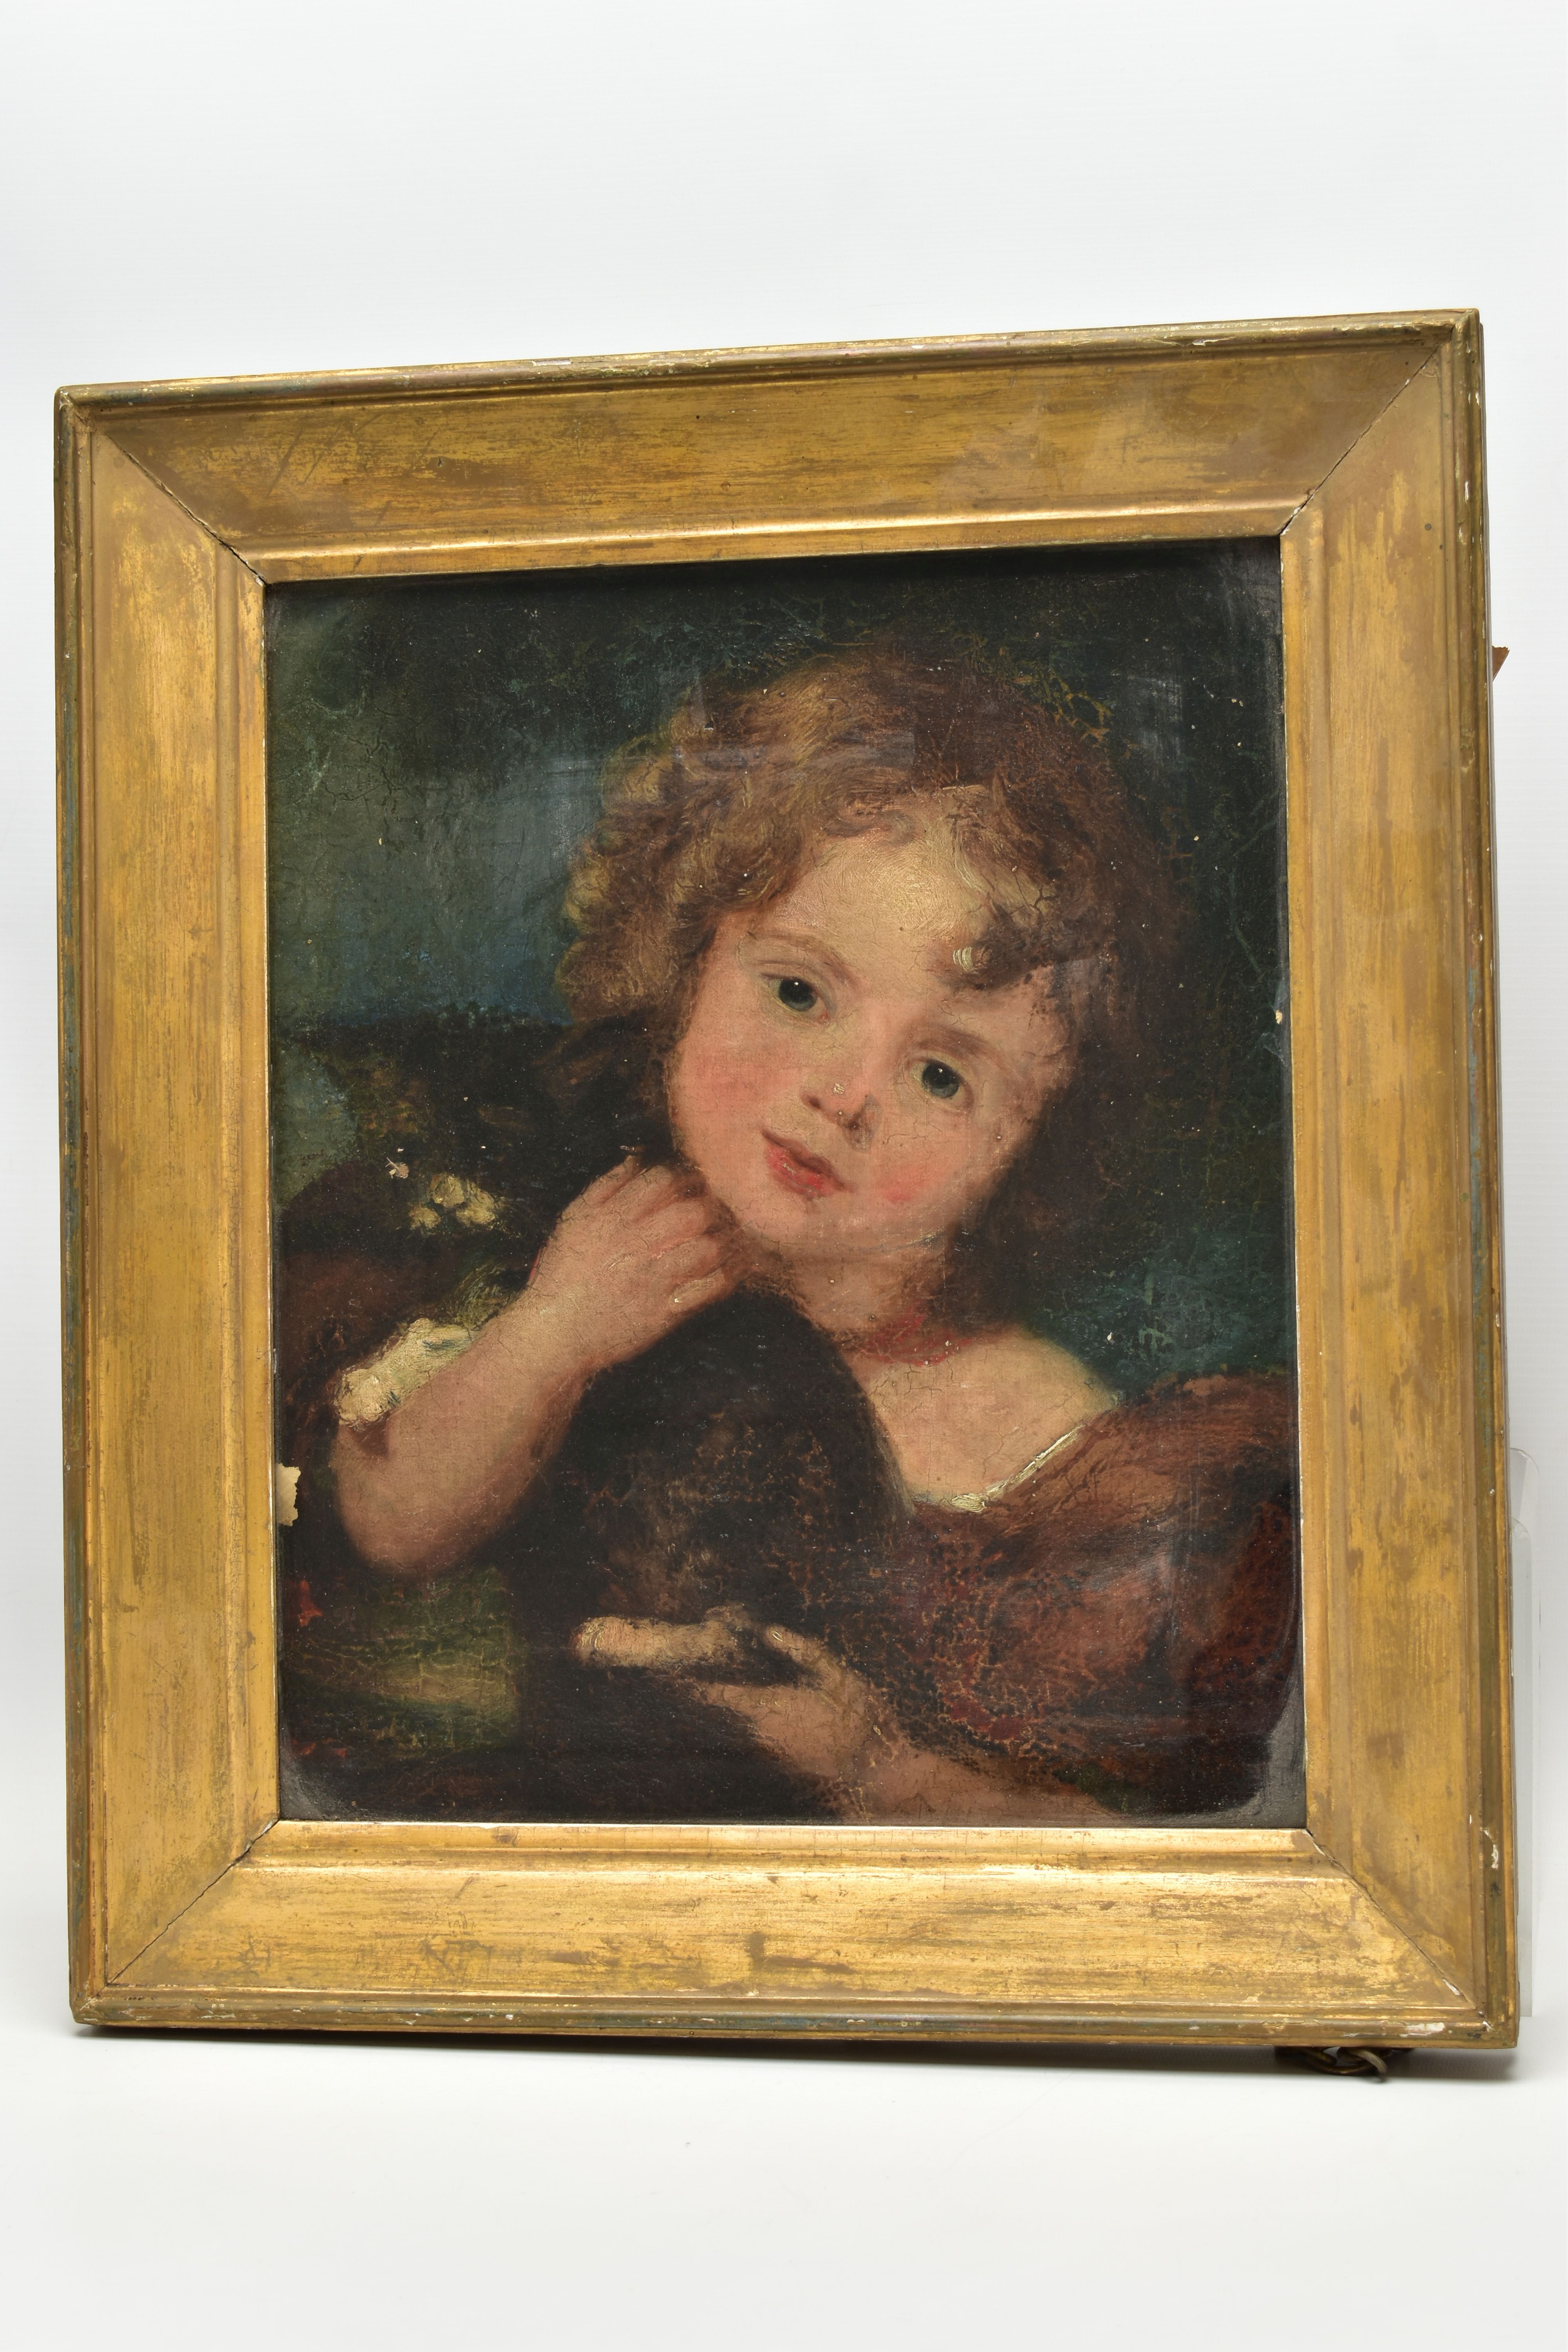 19TH CENTURY BRITISH SCHOOL, a head and shoulders portrait of a child holding a black and white cat,